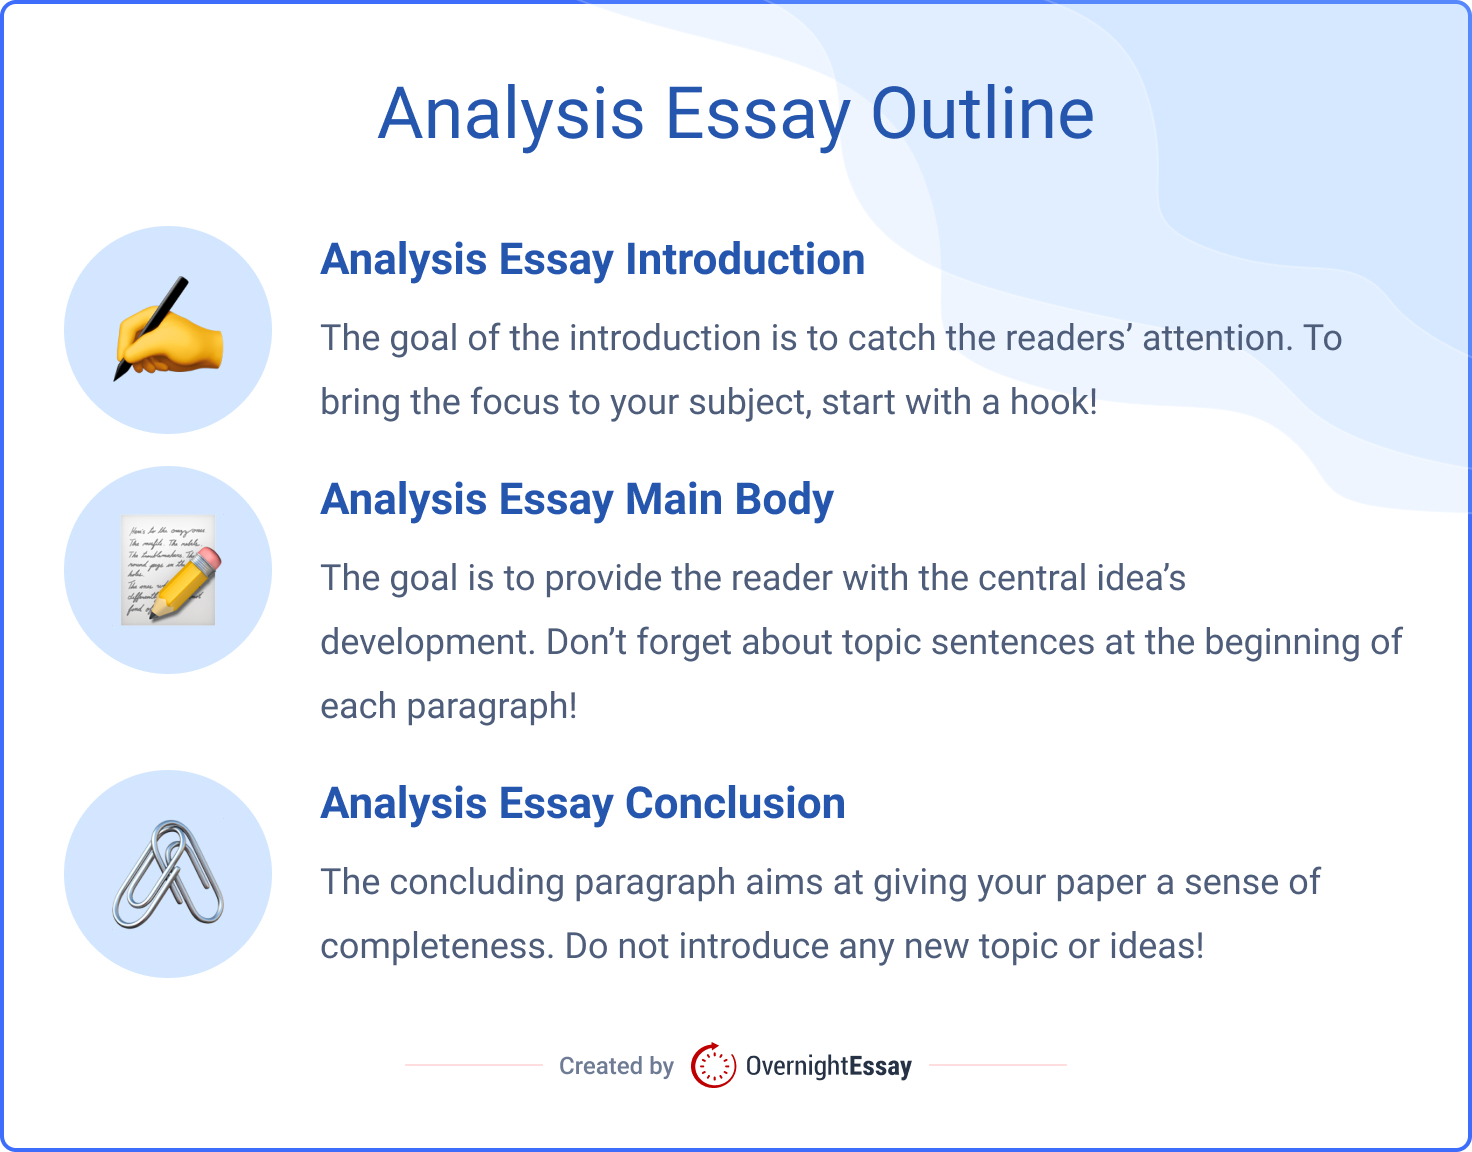 analyse in an essay question